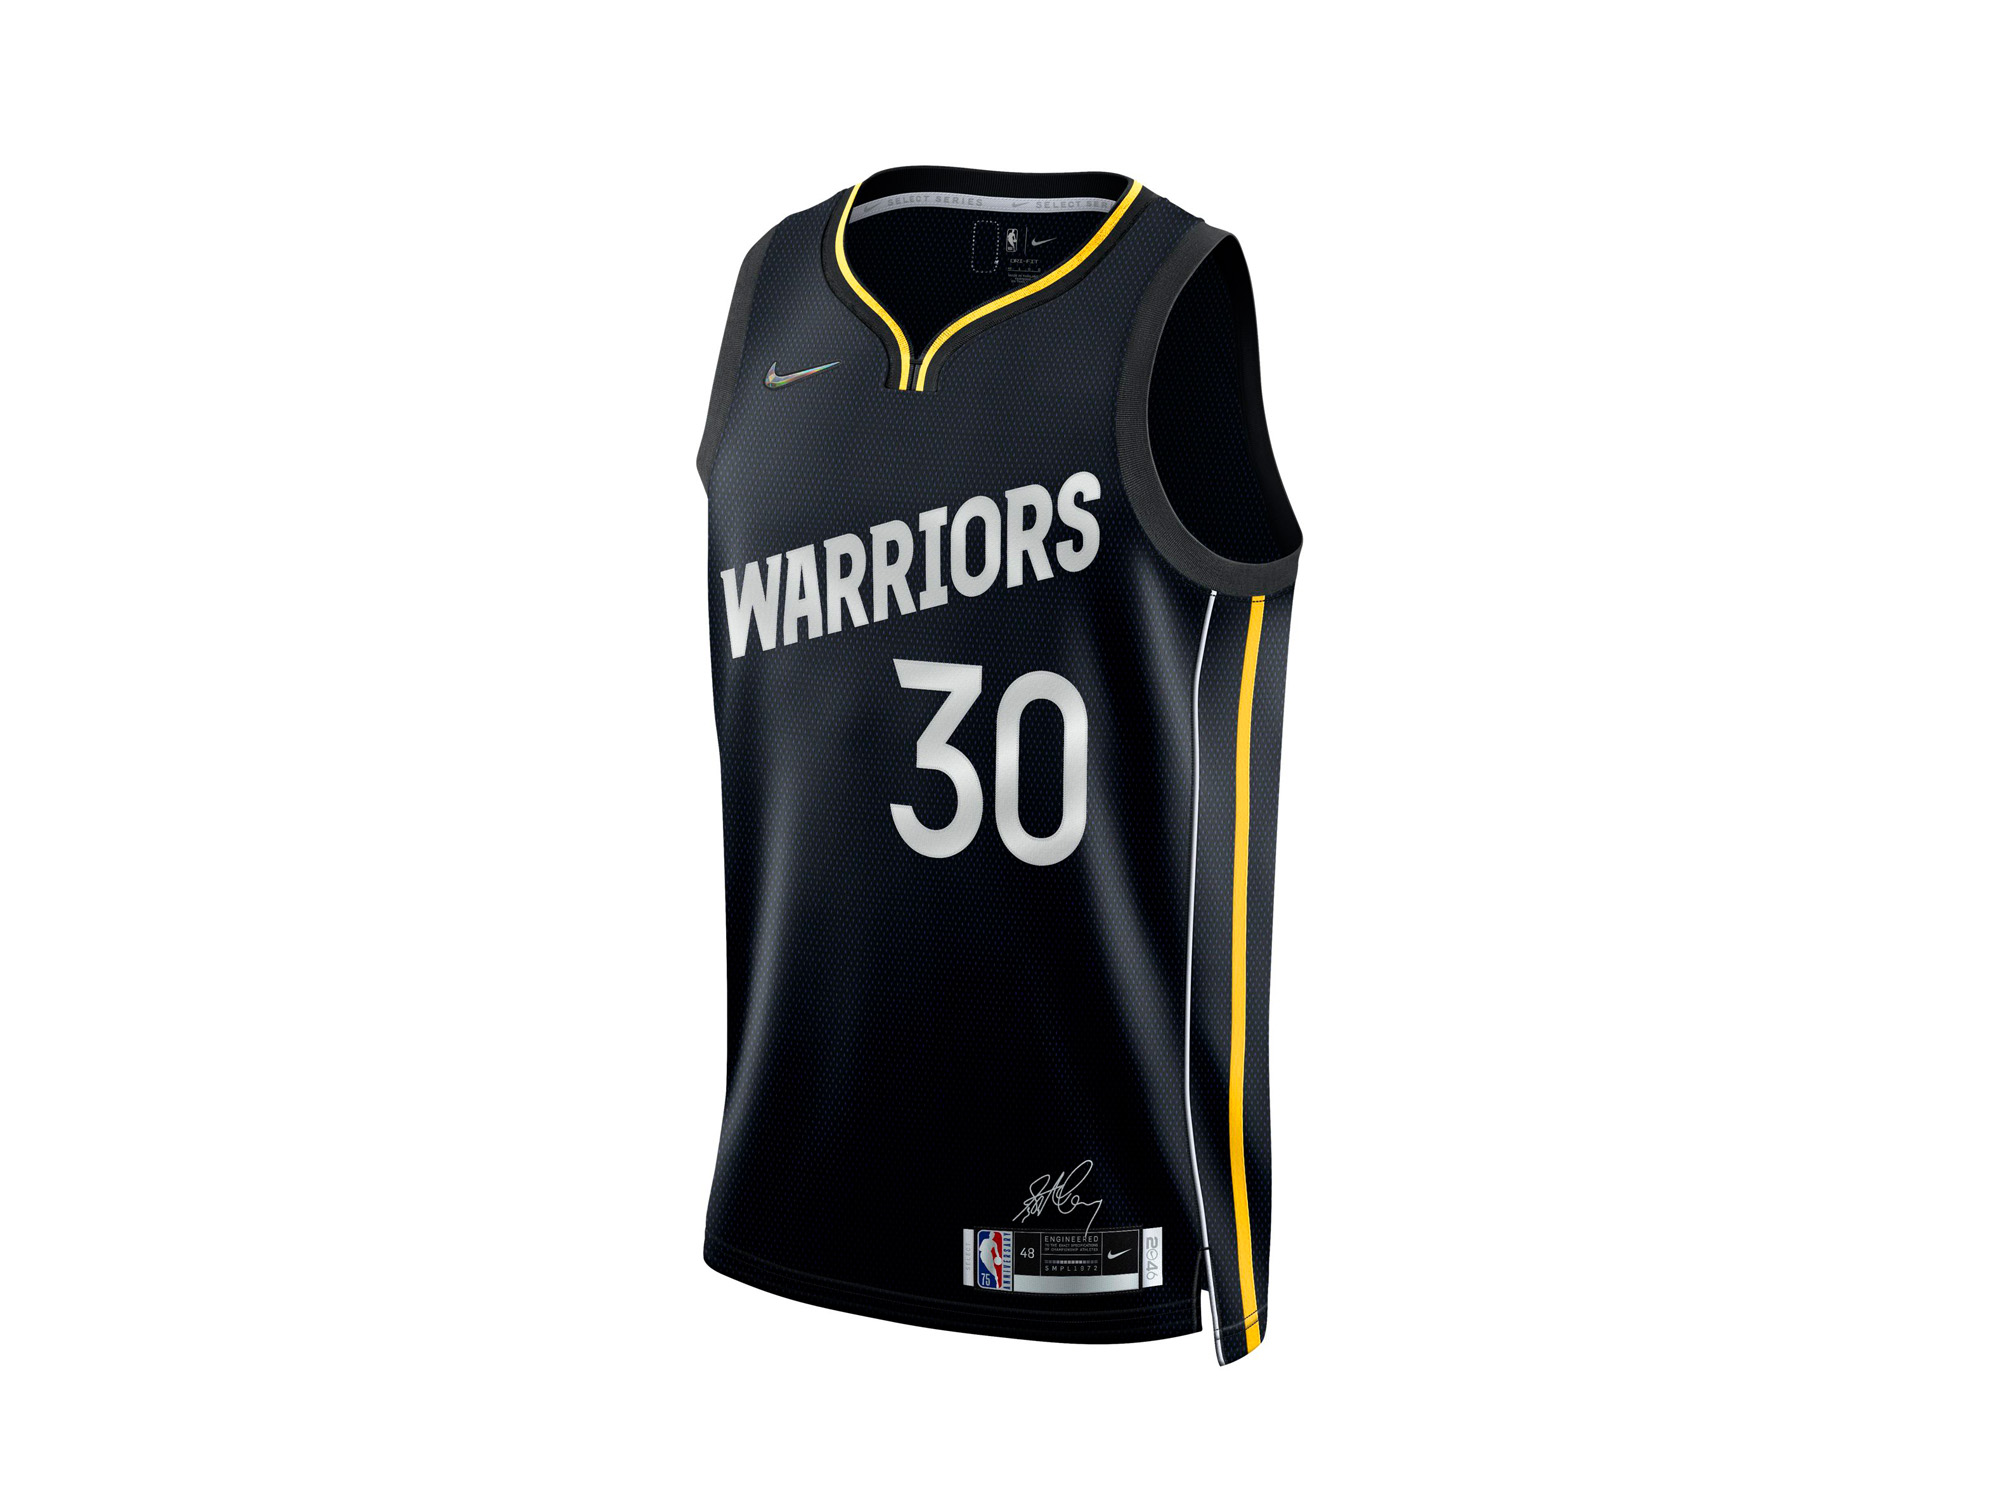 Nike Steph Curry MVP Edition Jersey